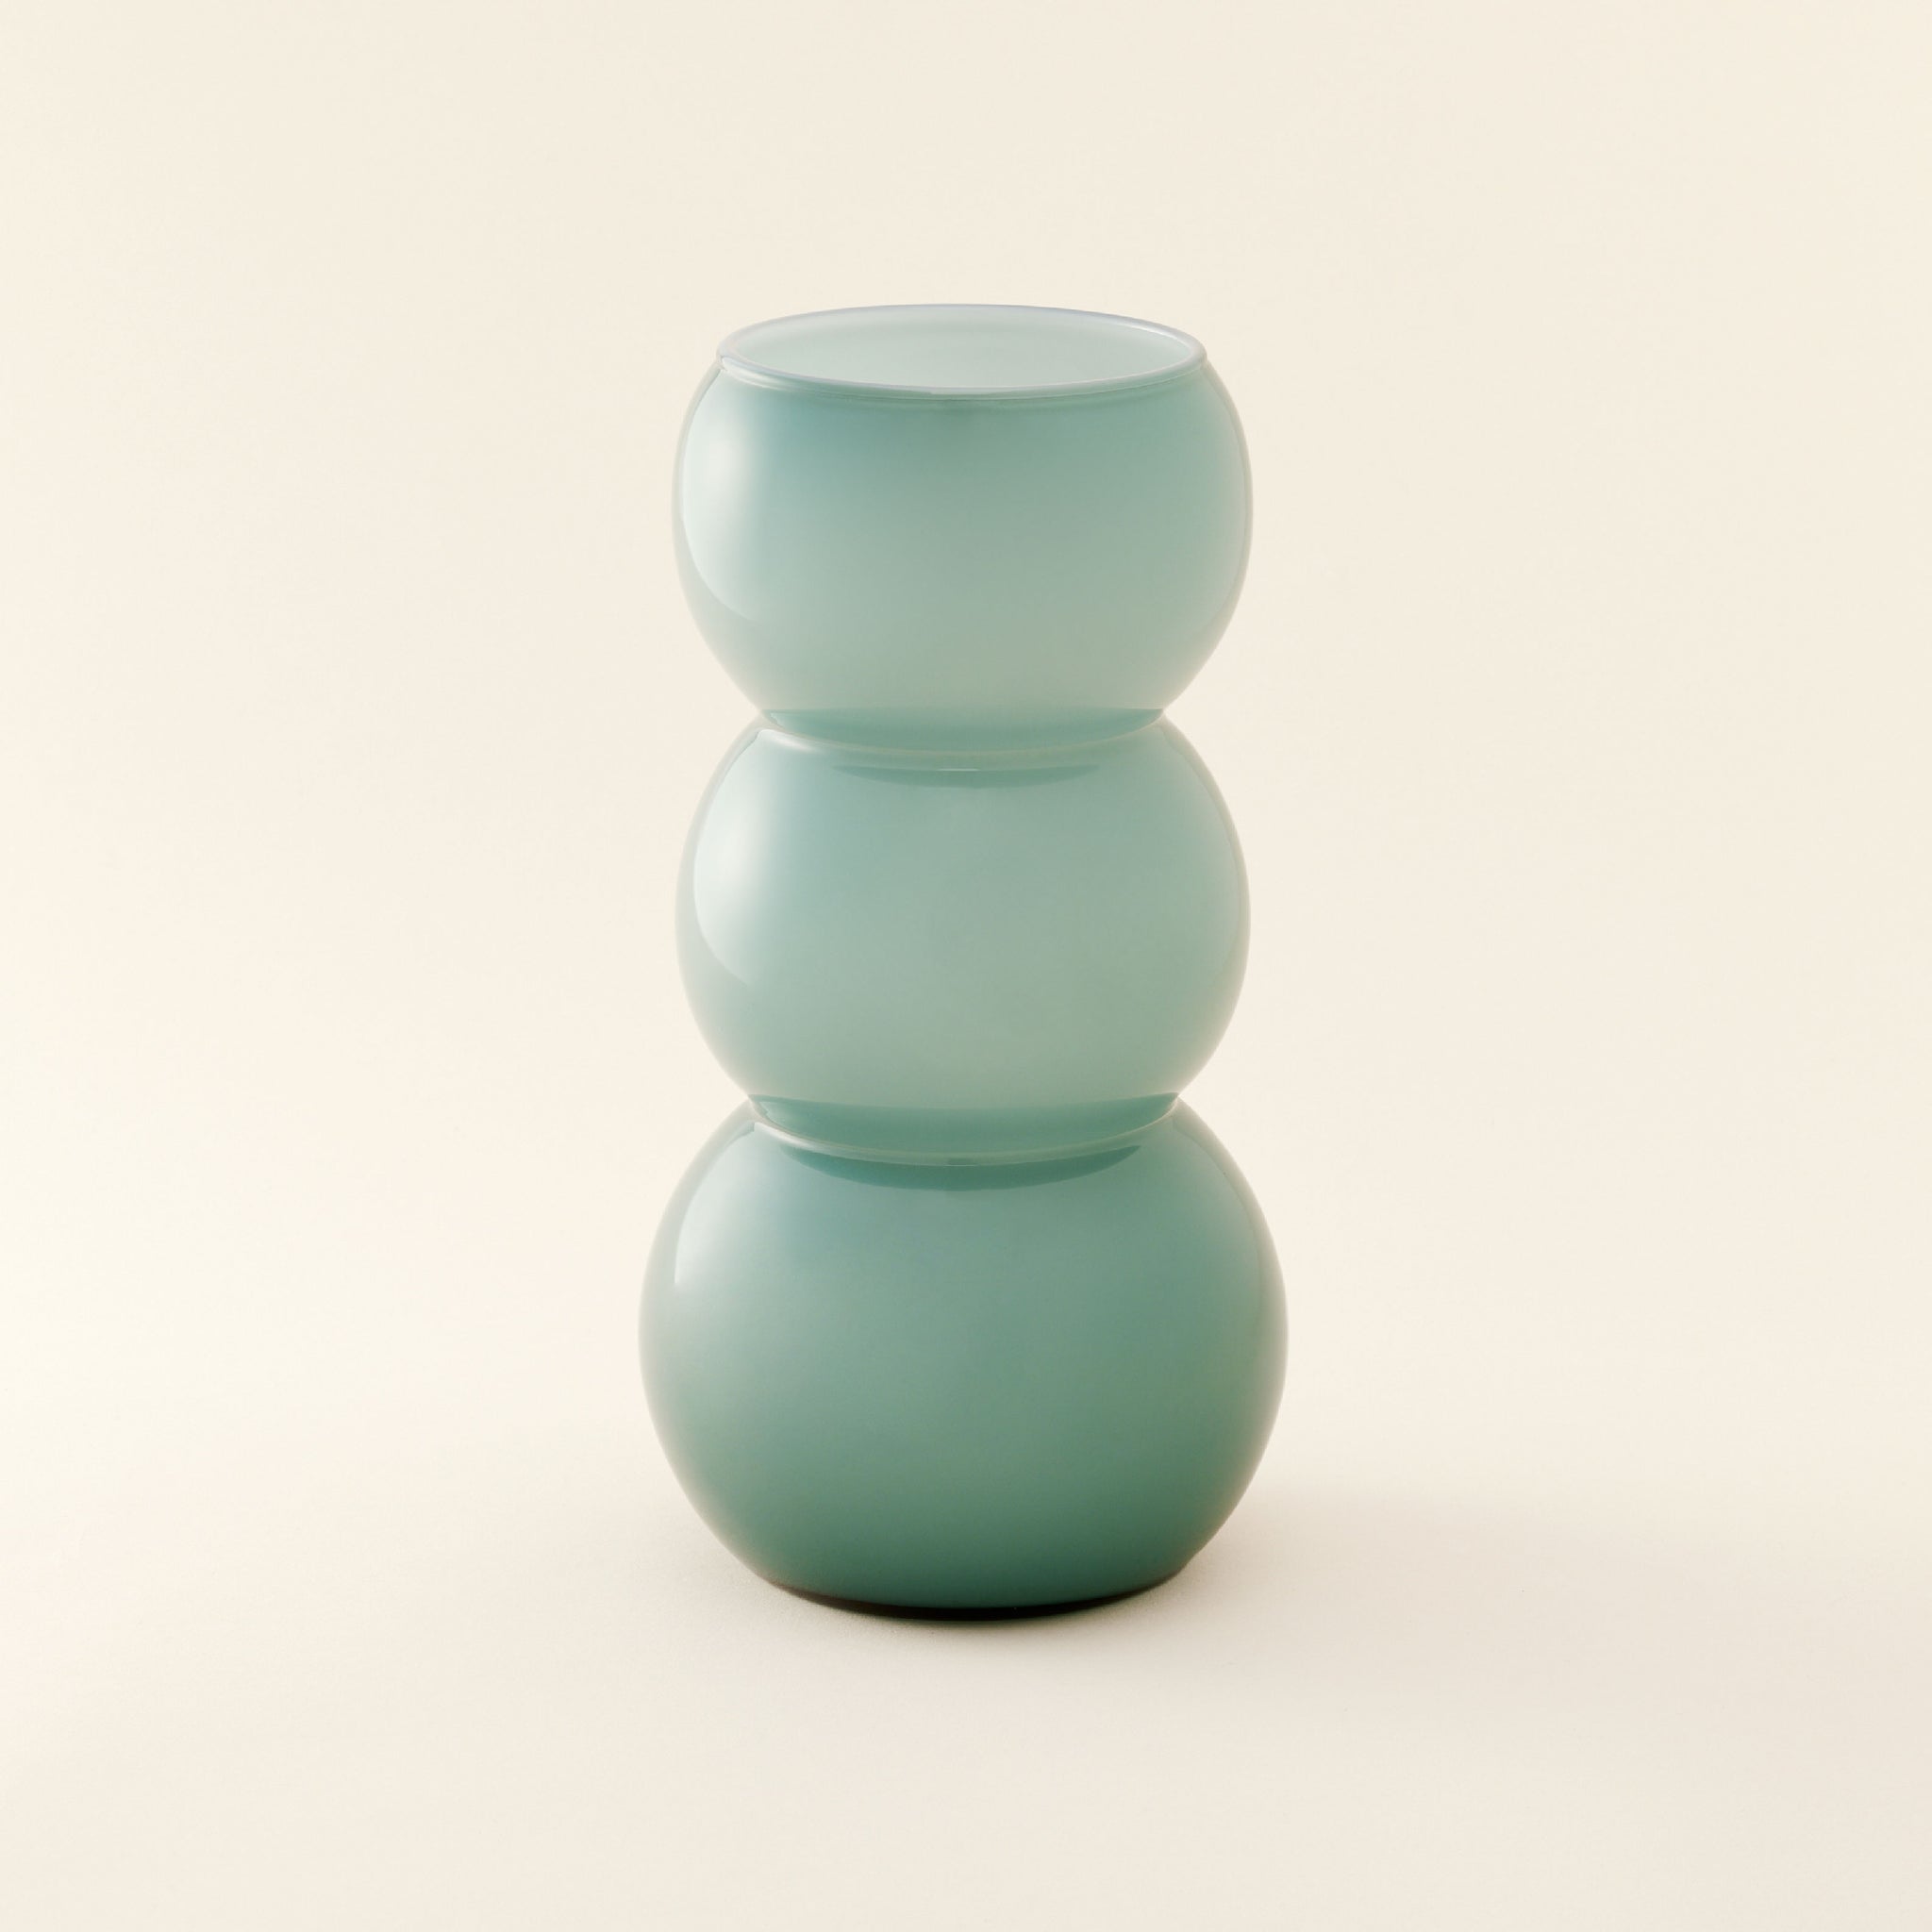 Eastern Glass Bubble Glass Vase | แจกัน